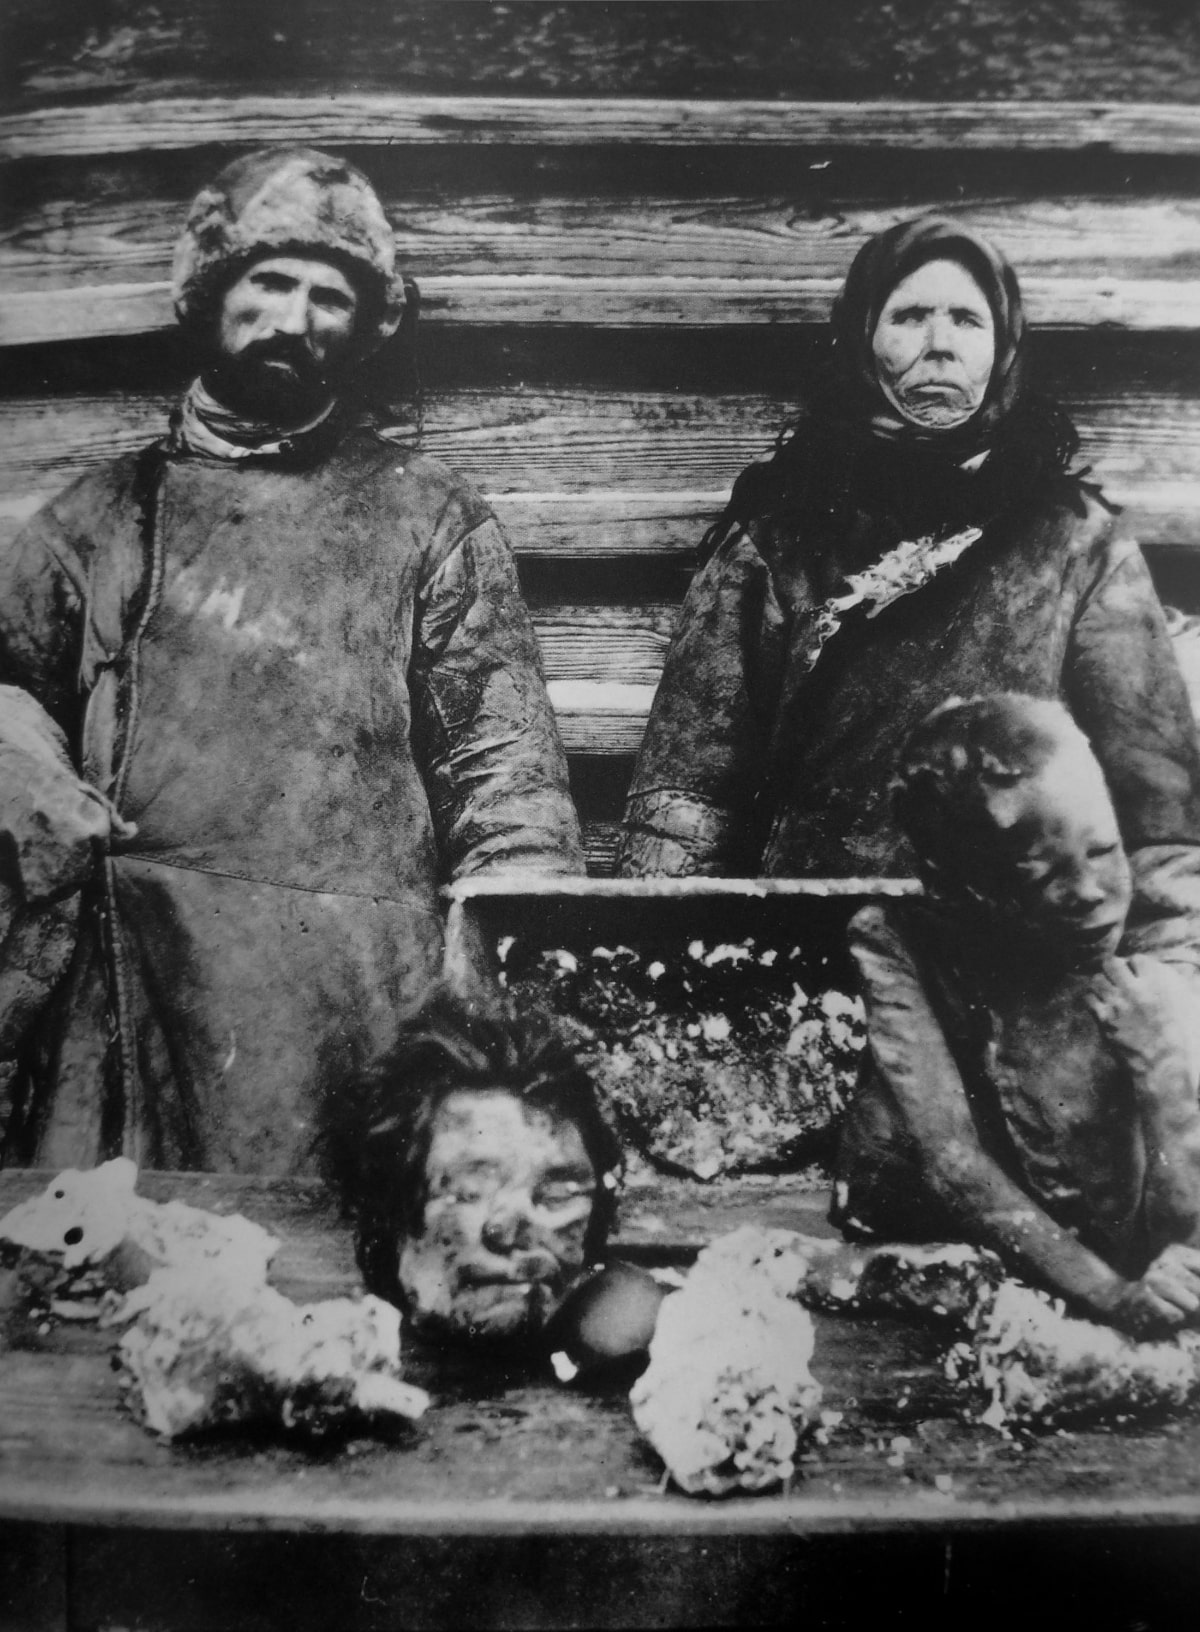 Tragedy in the Russian Famine (1921): The Heartbreaking Image of Desperation